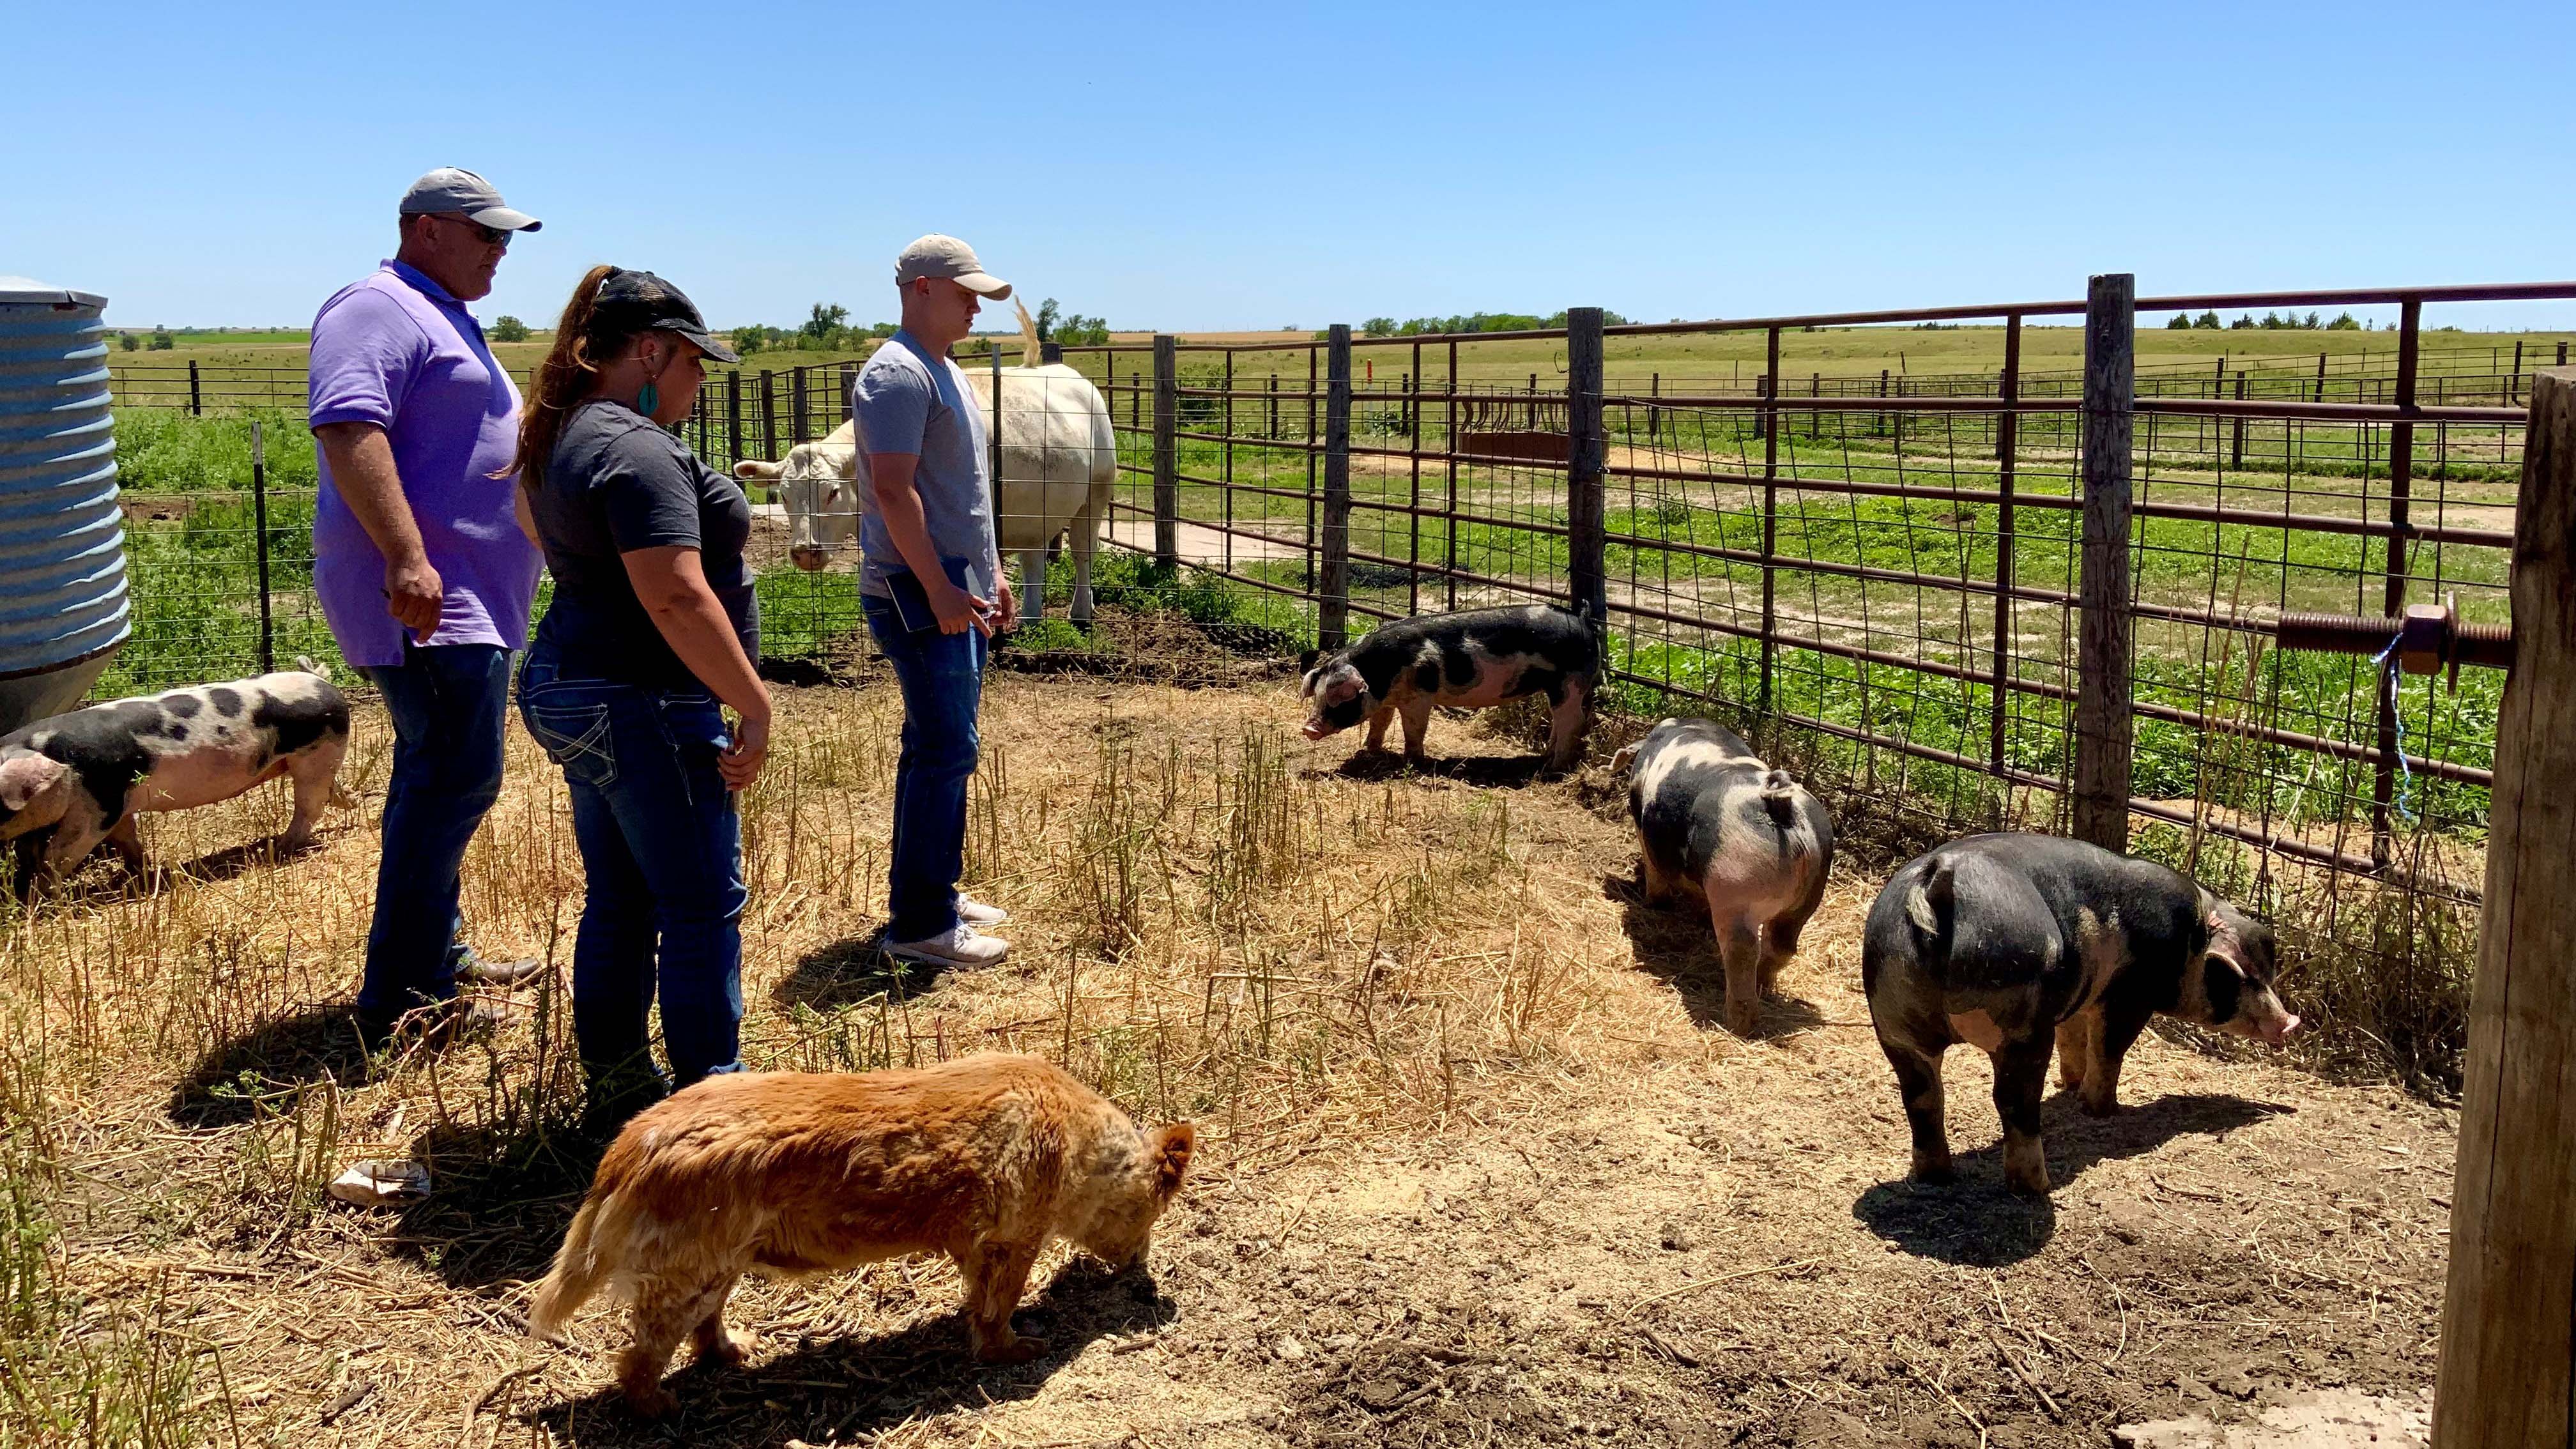 A curious stock dog (foreground) joins three high school agriculture educators during swine evaluation on Tuesday at the Nebraska College of Technical Agriculture Ag Ed Boot Camp and Coaches Clinic in Curtis. (Andela Taylor photo / NCTA)